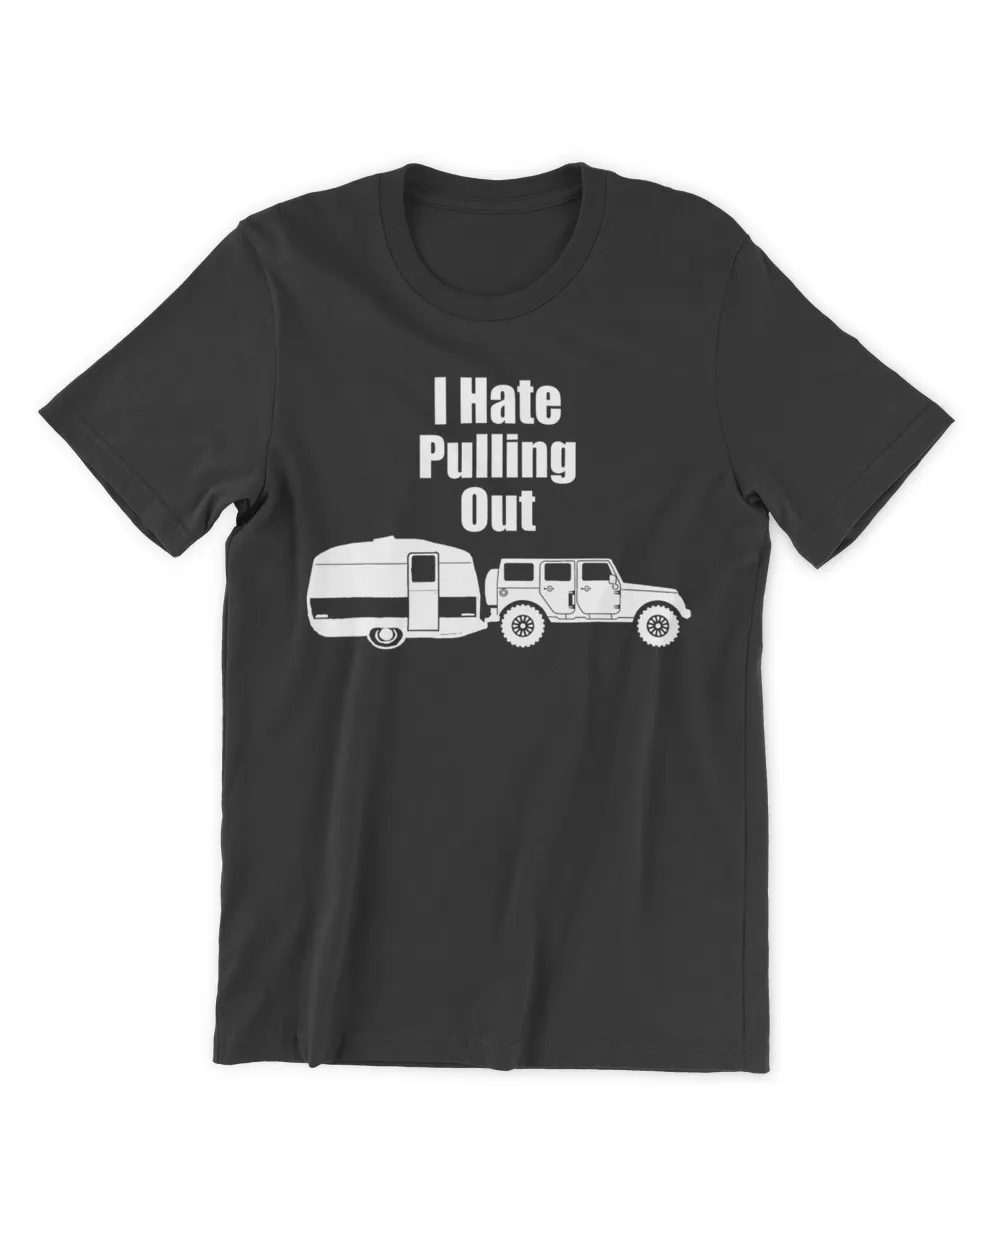 Funny Camping Shirt I Hate Pulling Out Funny Mens T-Shirt